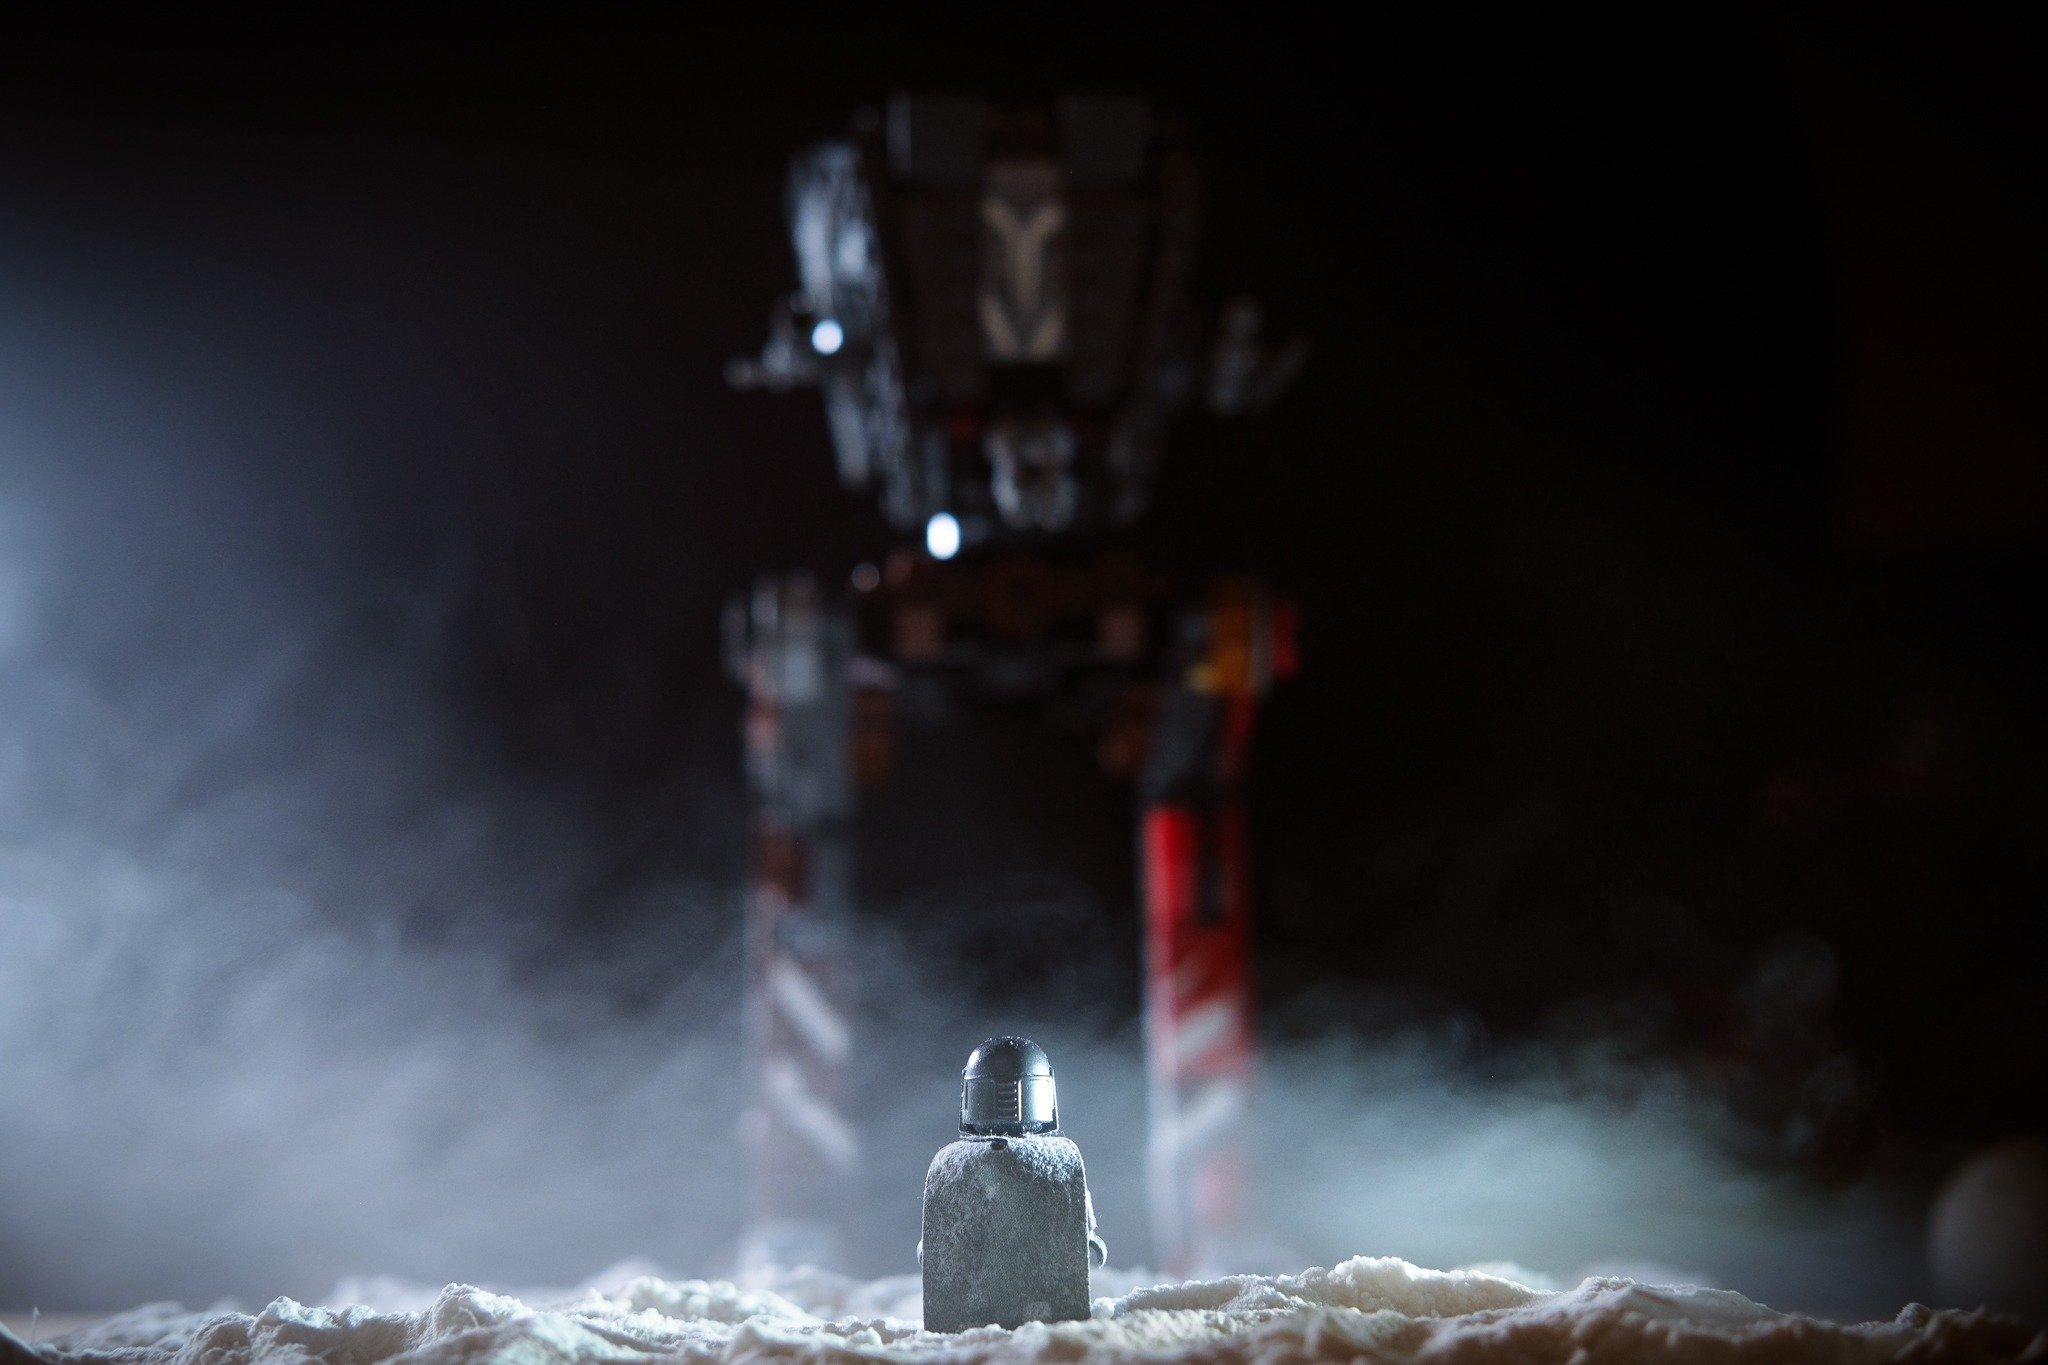 8 Toy photography tips & tricks to get you started